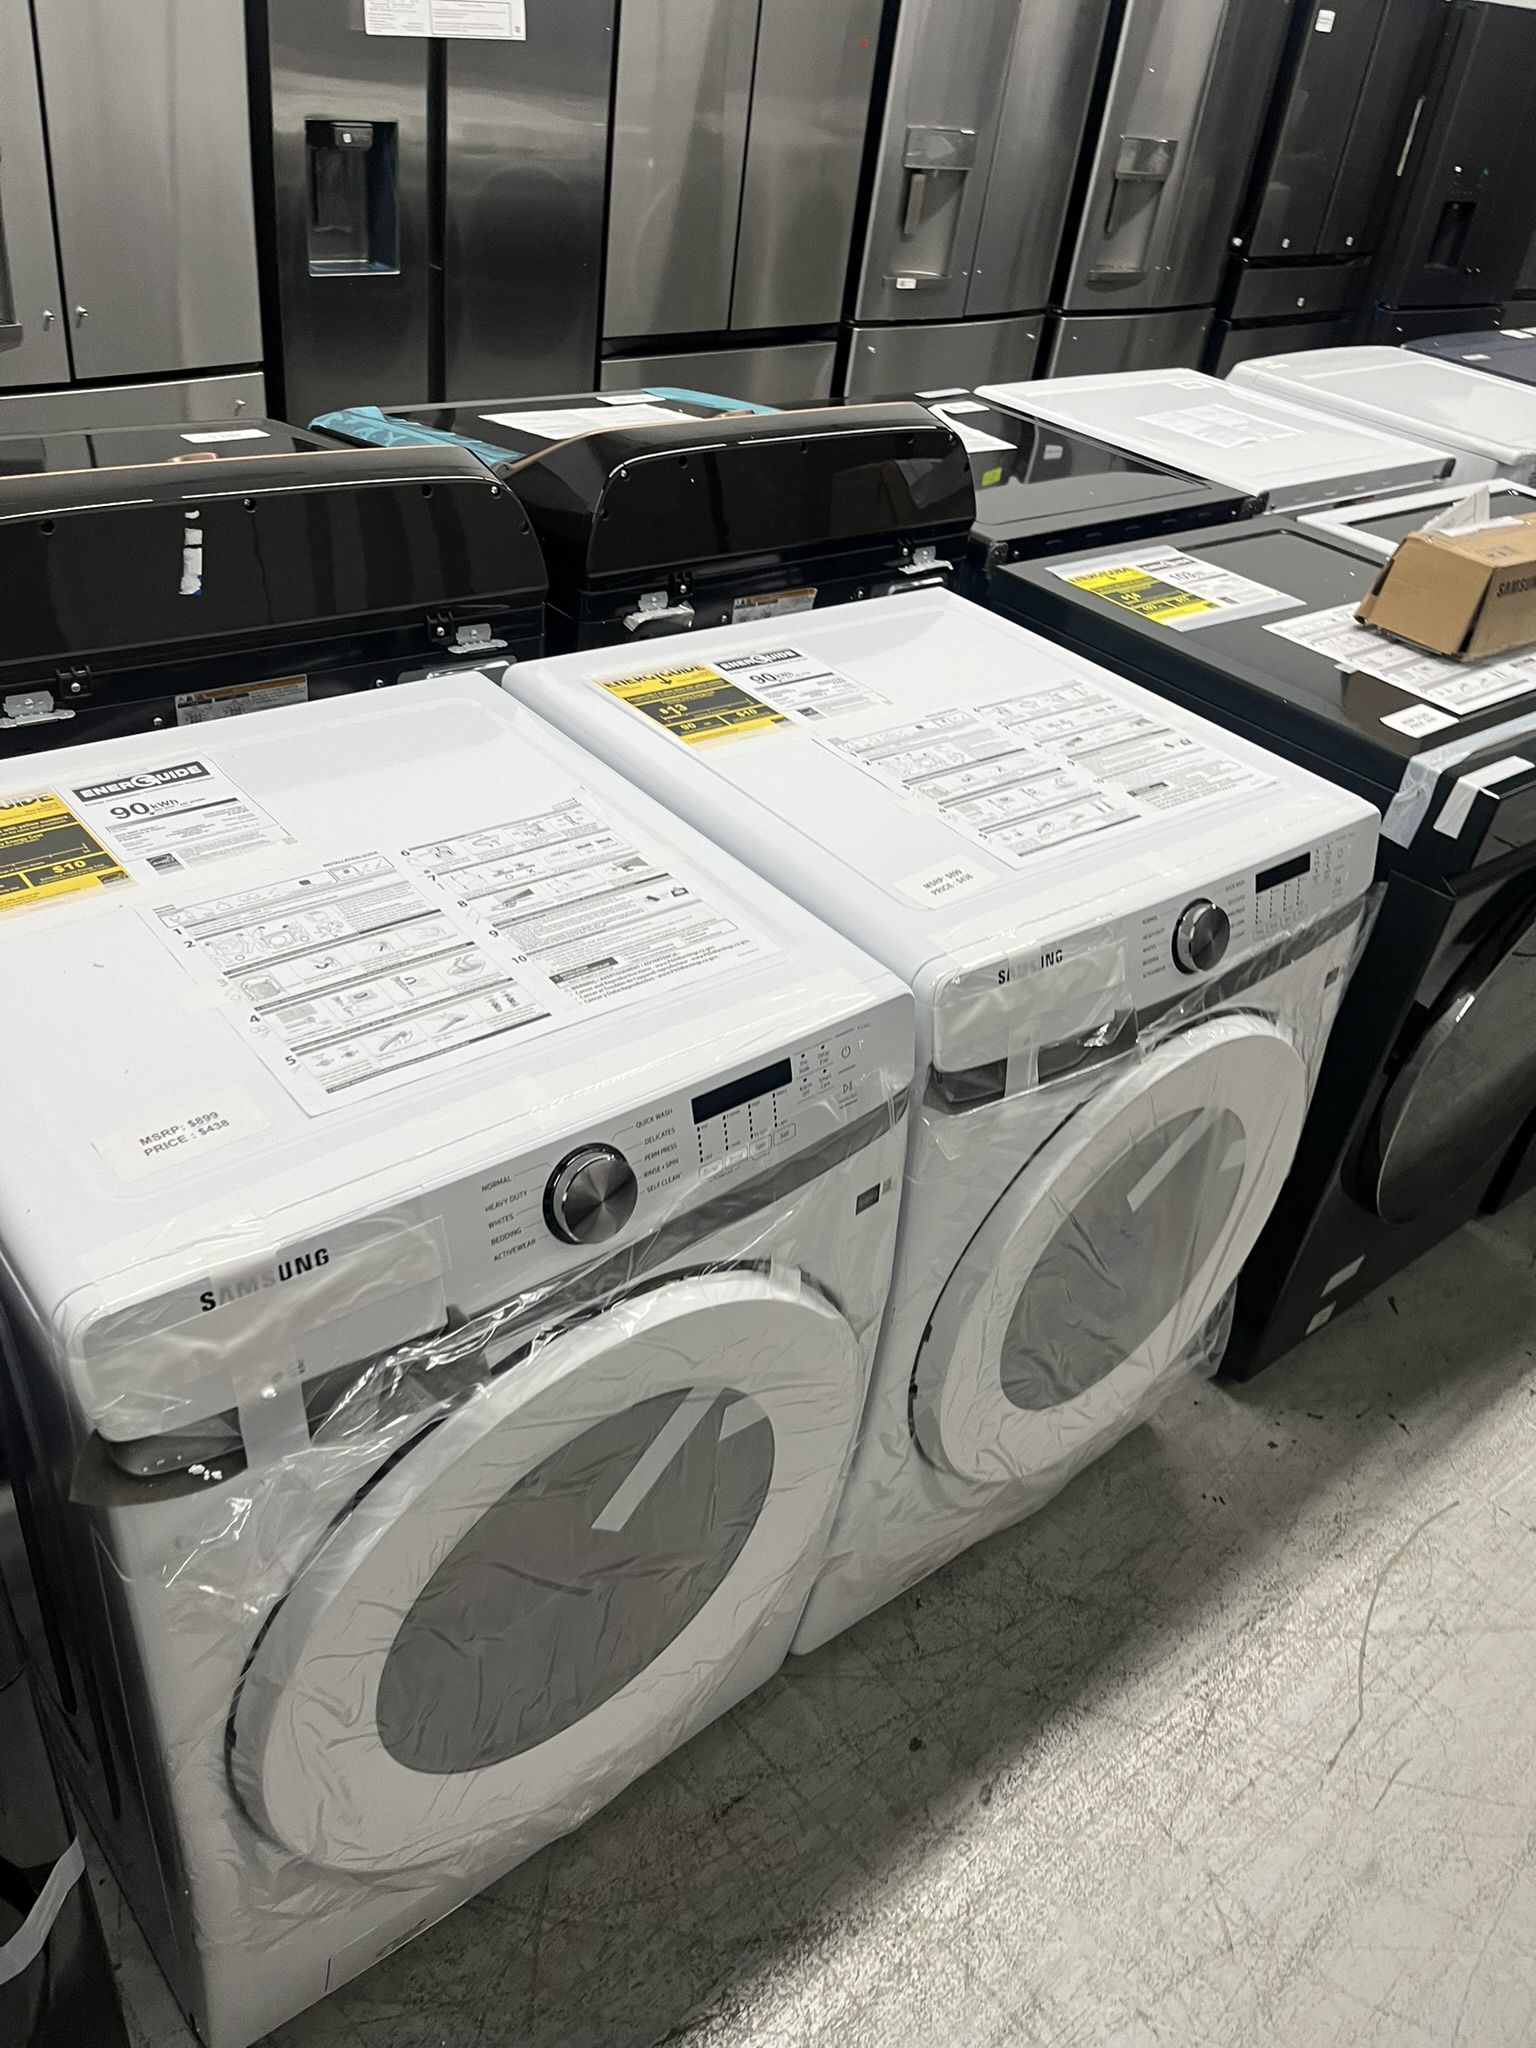 Weekly Deals on Washers & Dryers (brand new) 